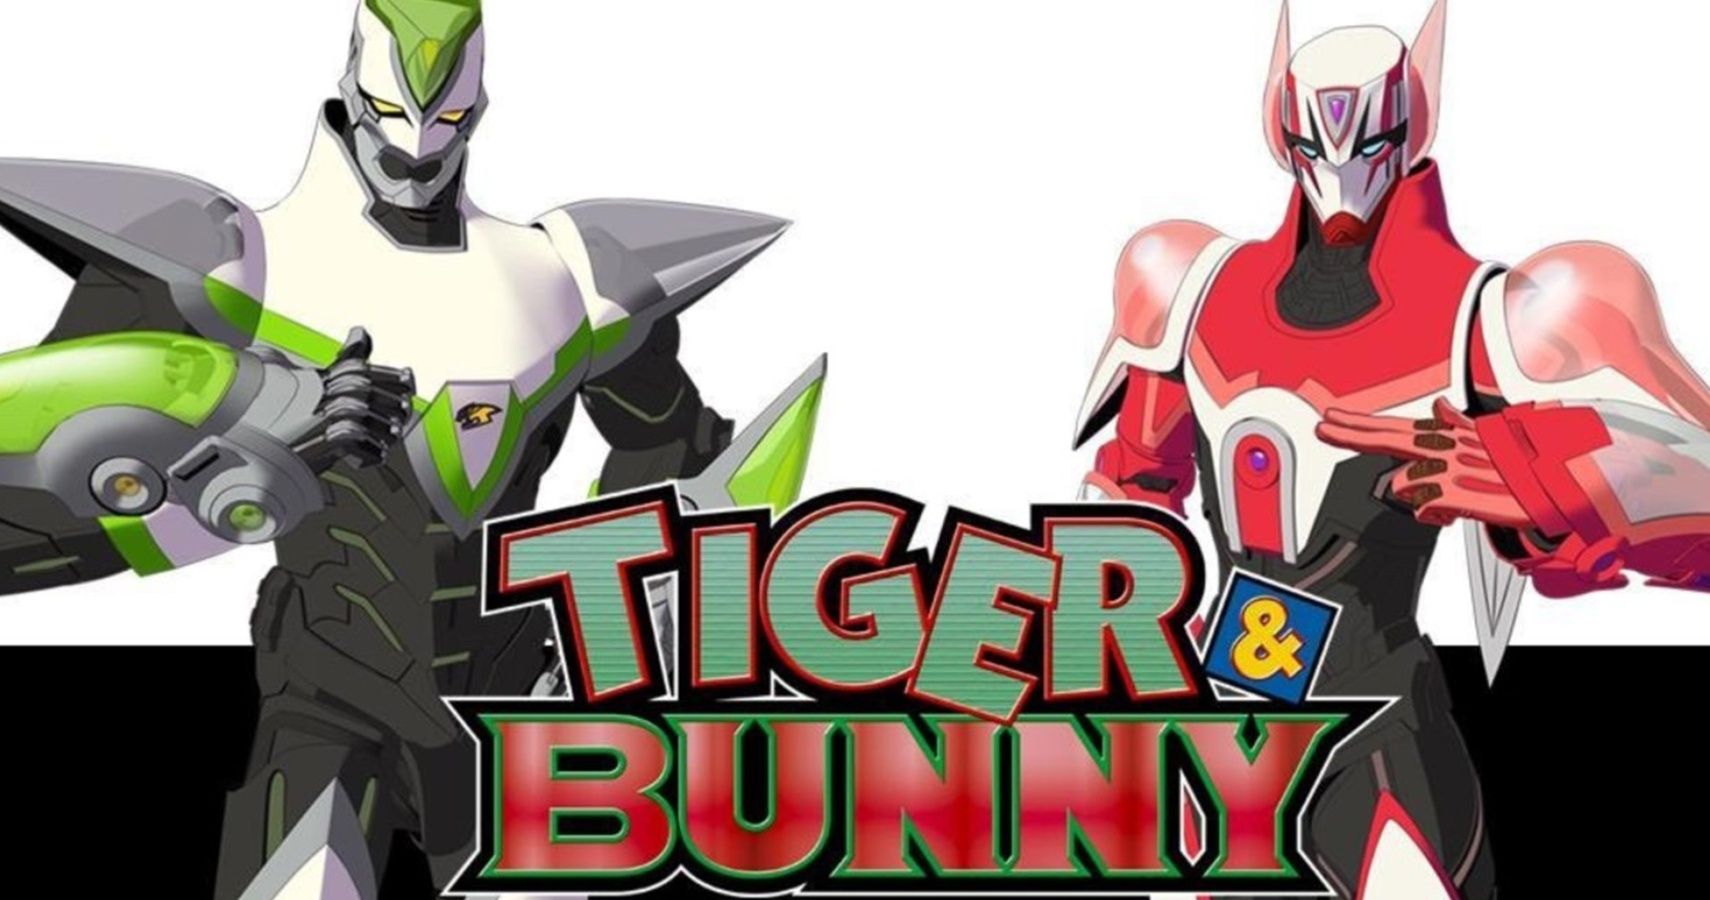 Why My Hero Academia Hit In America But Tiger Bunny Didn T